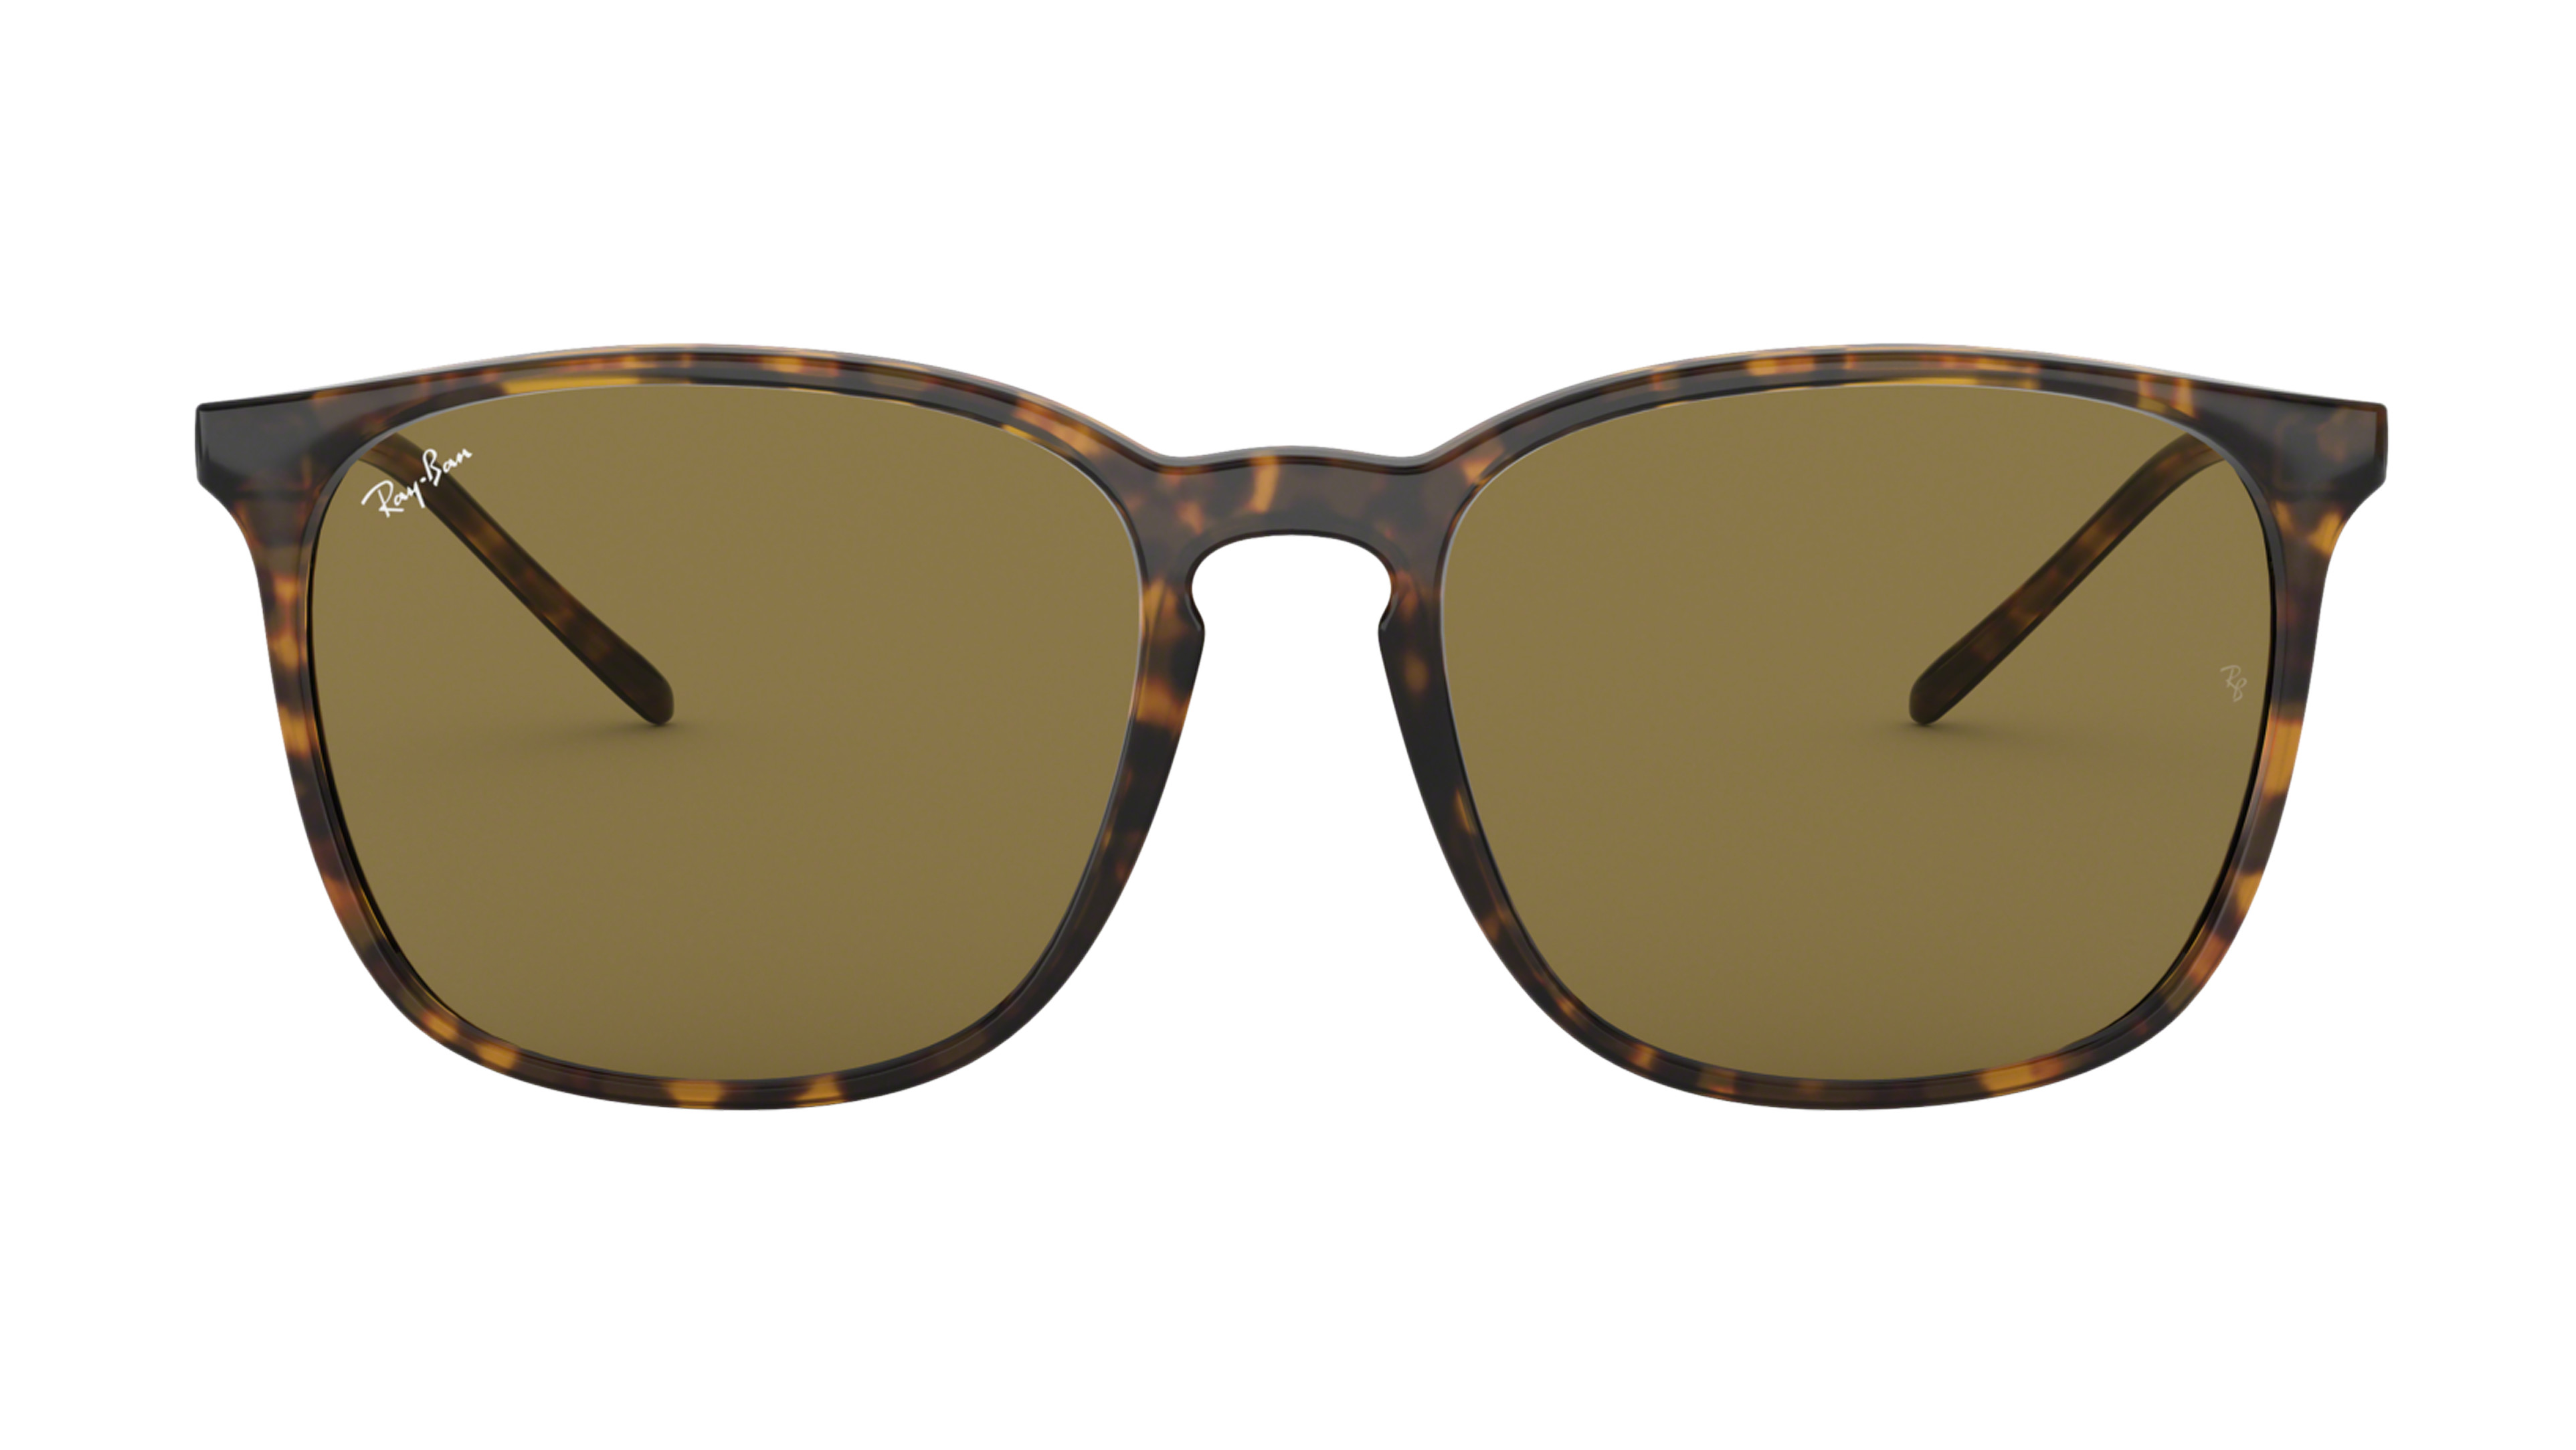 [products.image.front] Ray-Ban 0RB4387 710/73 Sonnenbrille